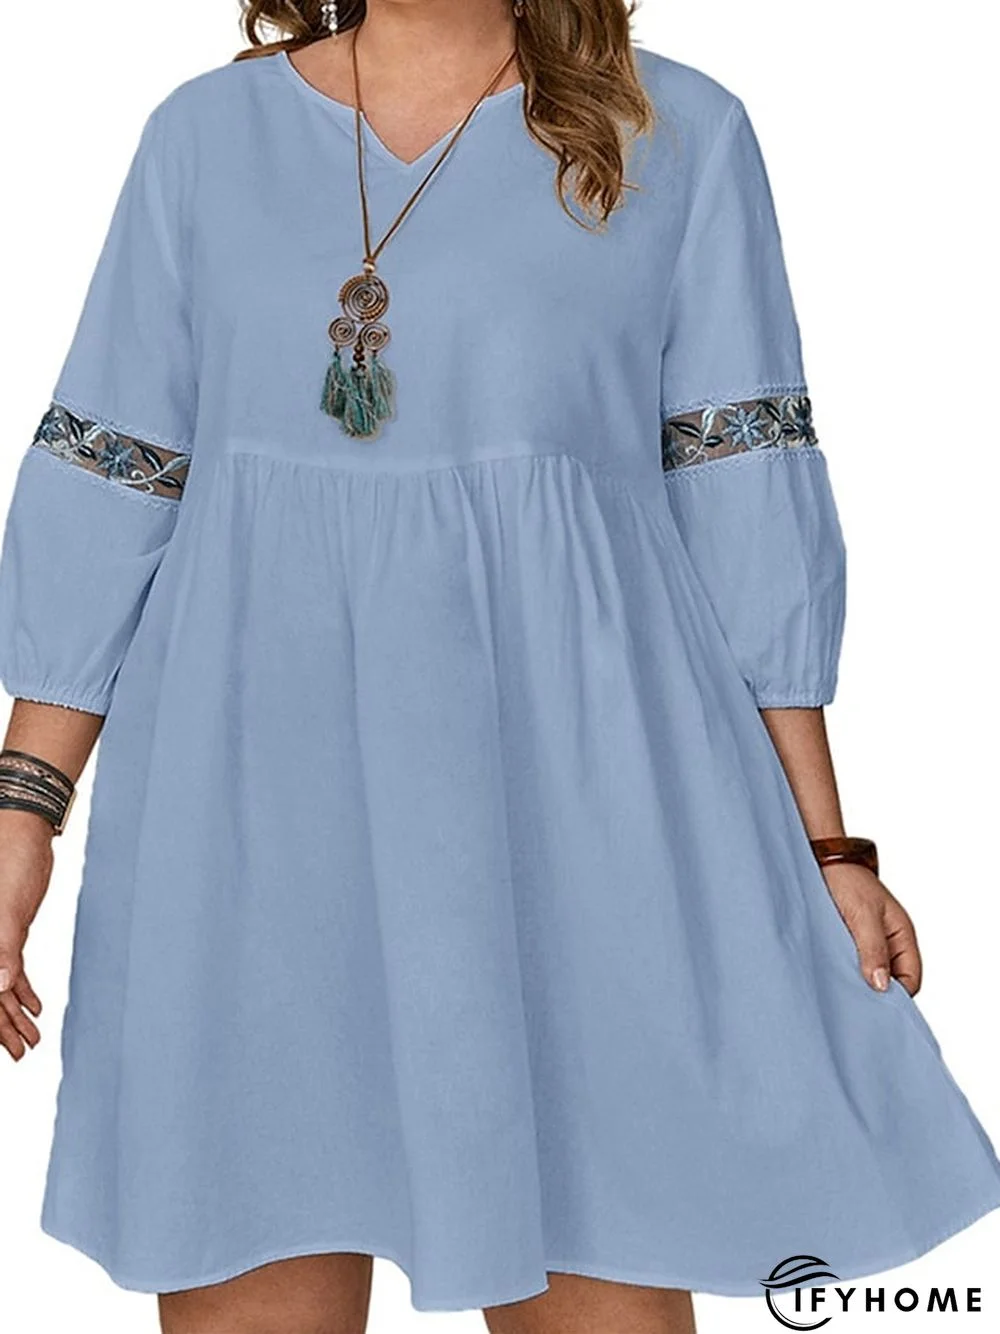 Women's Plus Size Casual Dress A Line Dress Solid Color Mini Dress 3/4 Length Sleeve Mesh Embroidered V Neck Fashion Daily White Blue Spring Summer XL XXL 3XL 4XL 5XL | IFYHOME